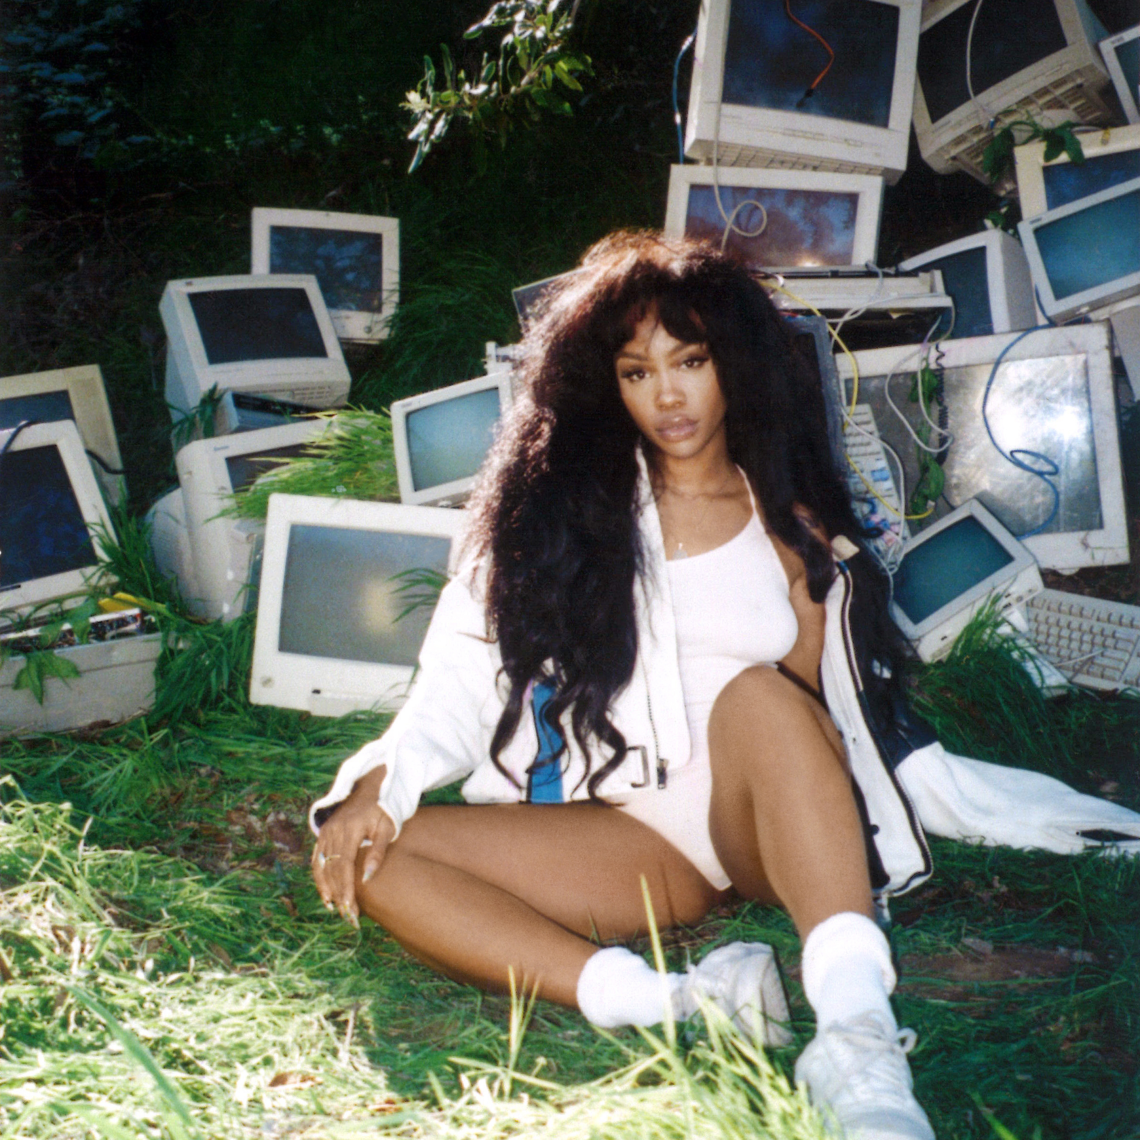 SZA Interview - Ctrl Aftermath